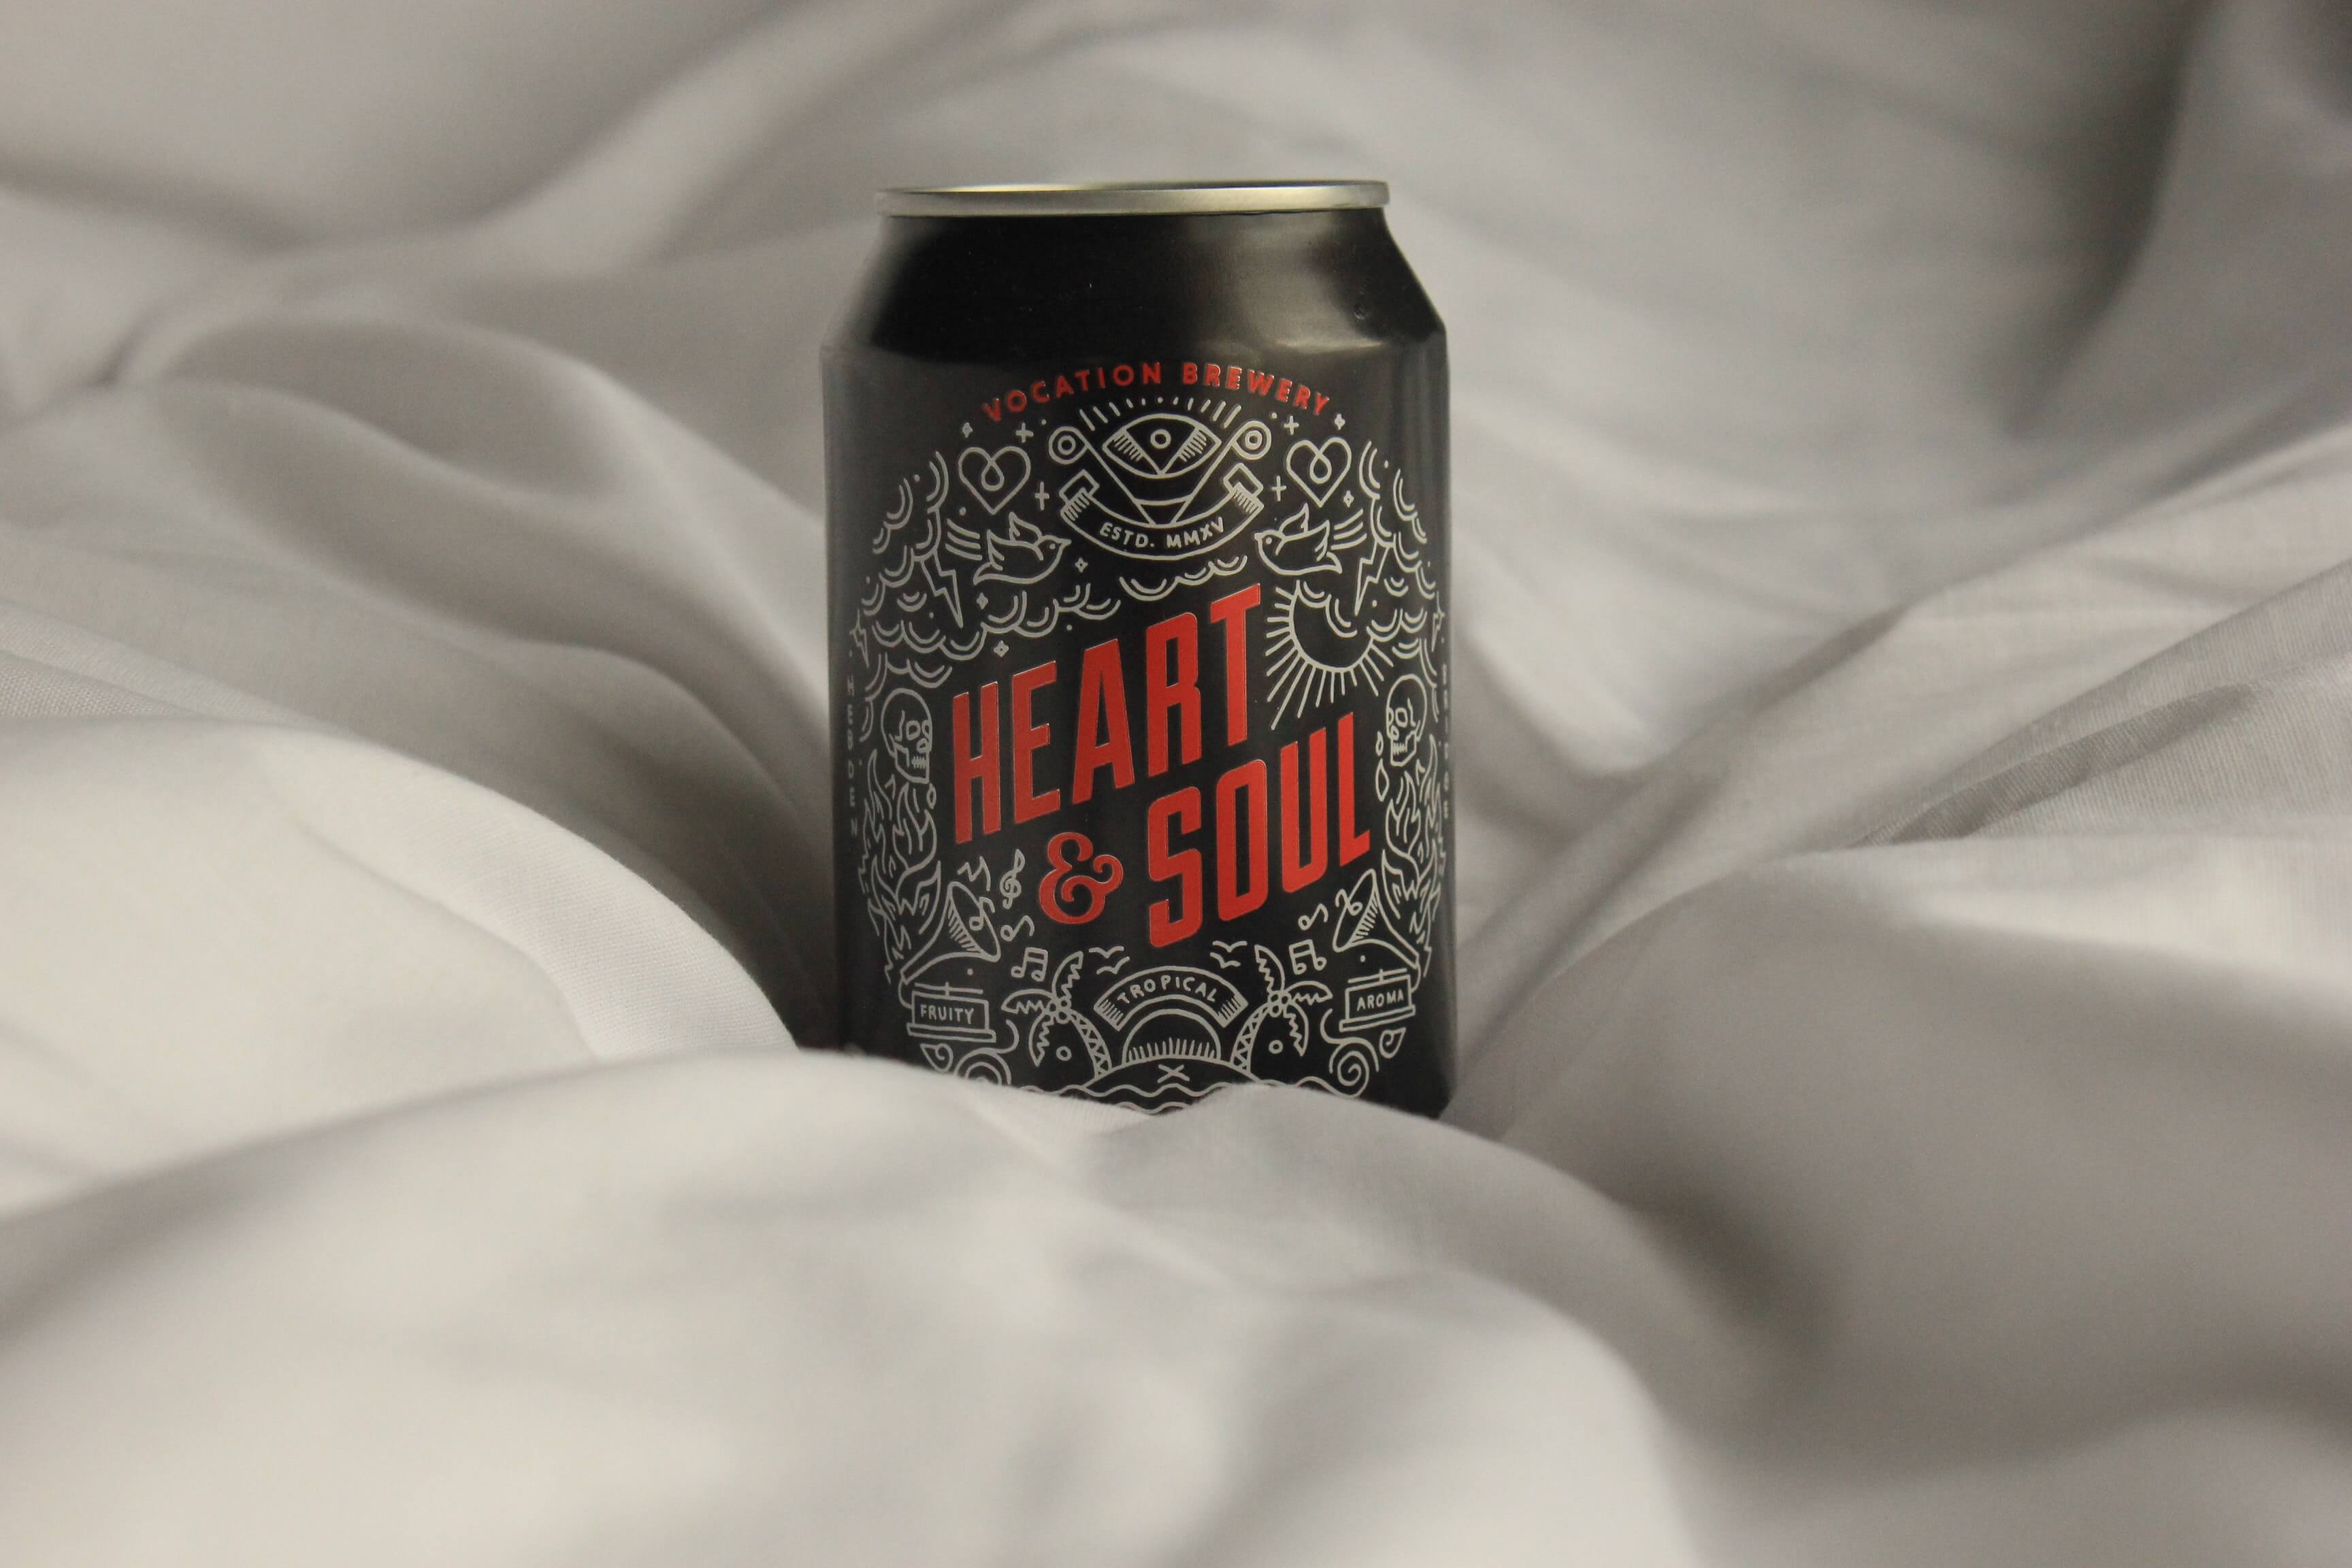 Photograph of a can of soda with the brand name Heart & Soul. The can is black, the logo and writing is red with white illustrations.